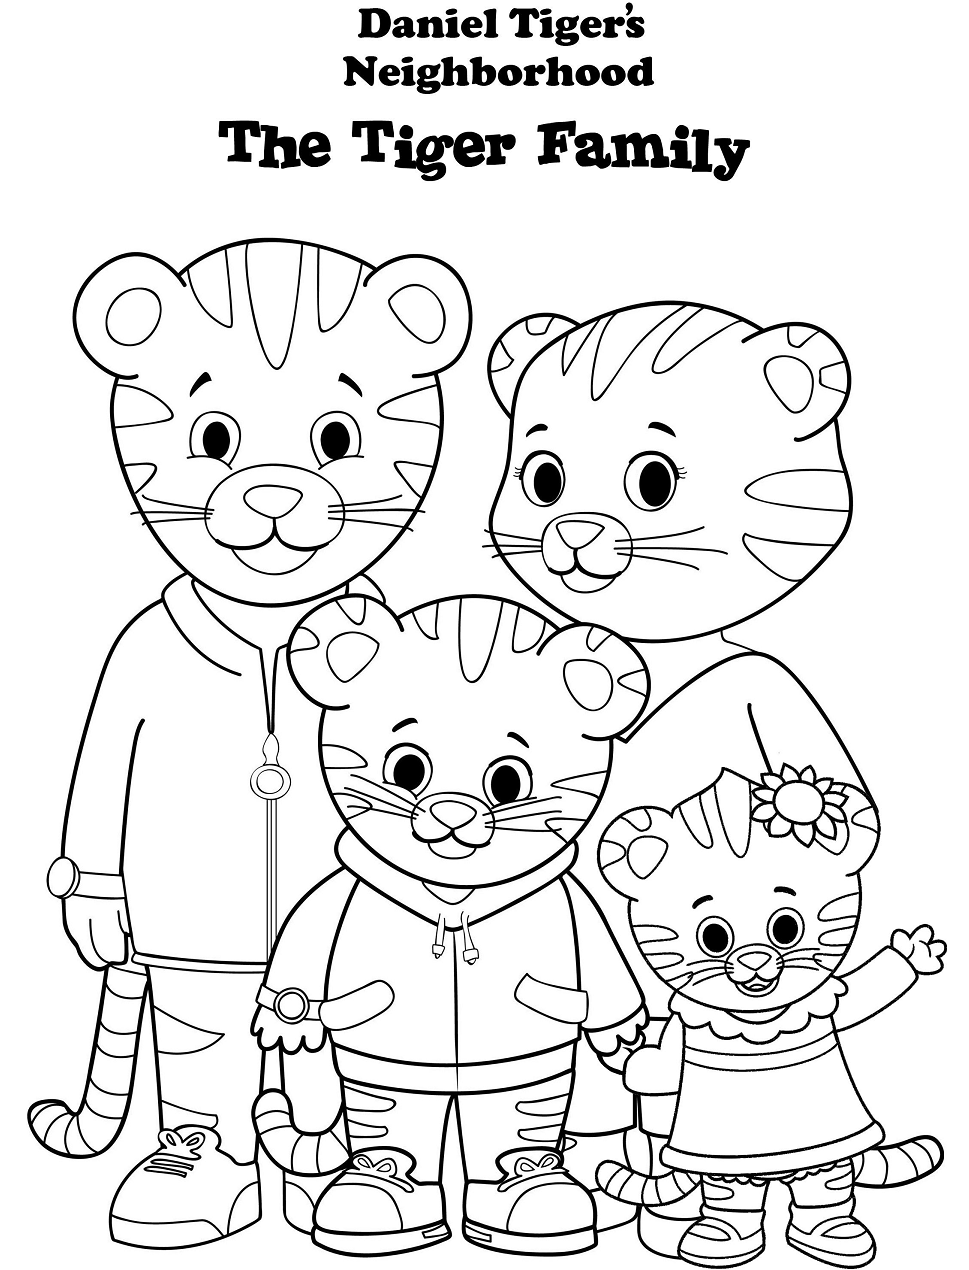 Daniel Tiger Family Coloring Page - Free Printable Coloring Pages for Kids